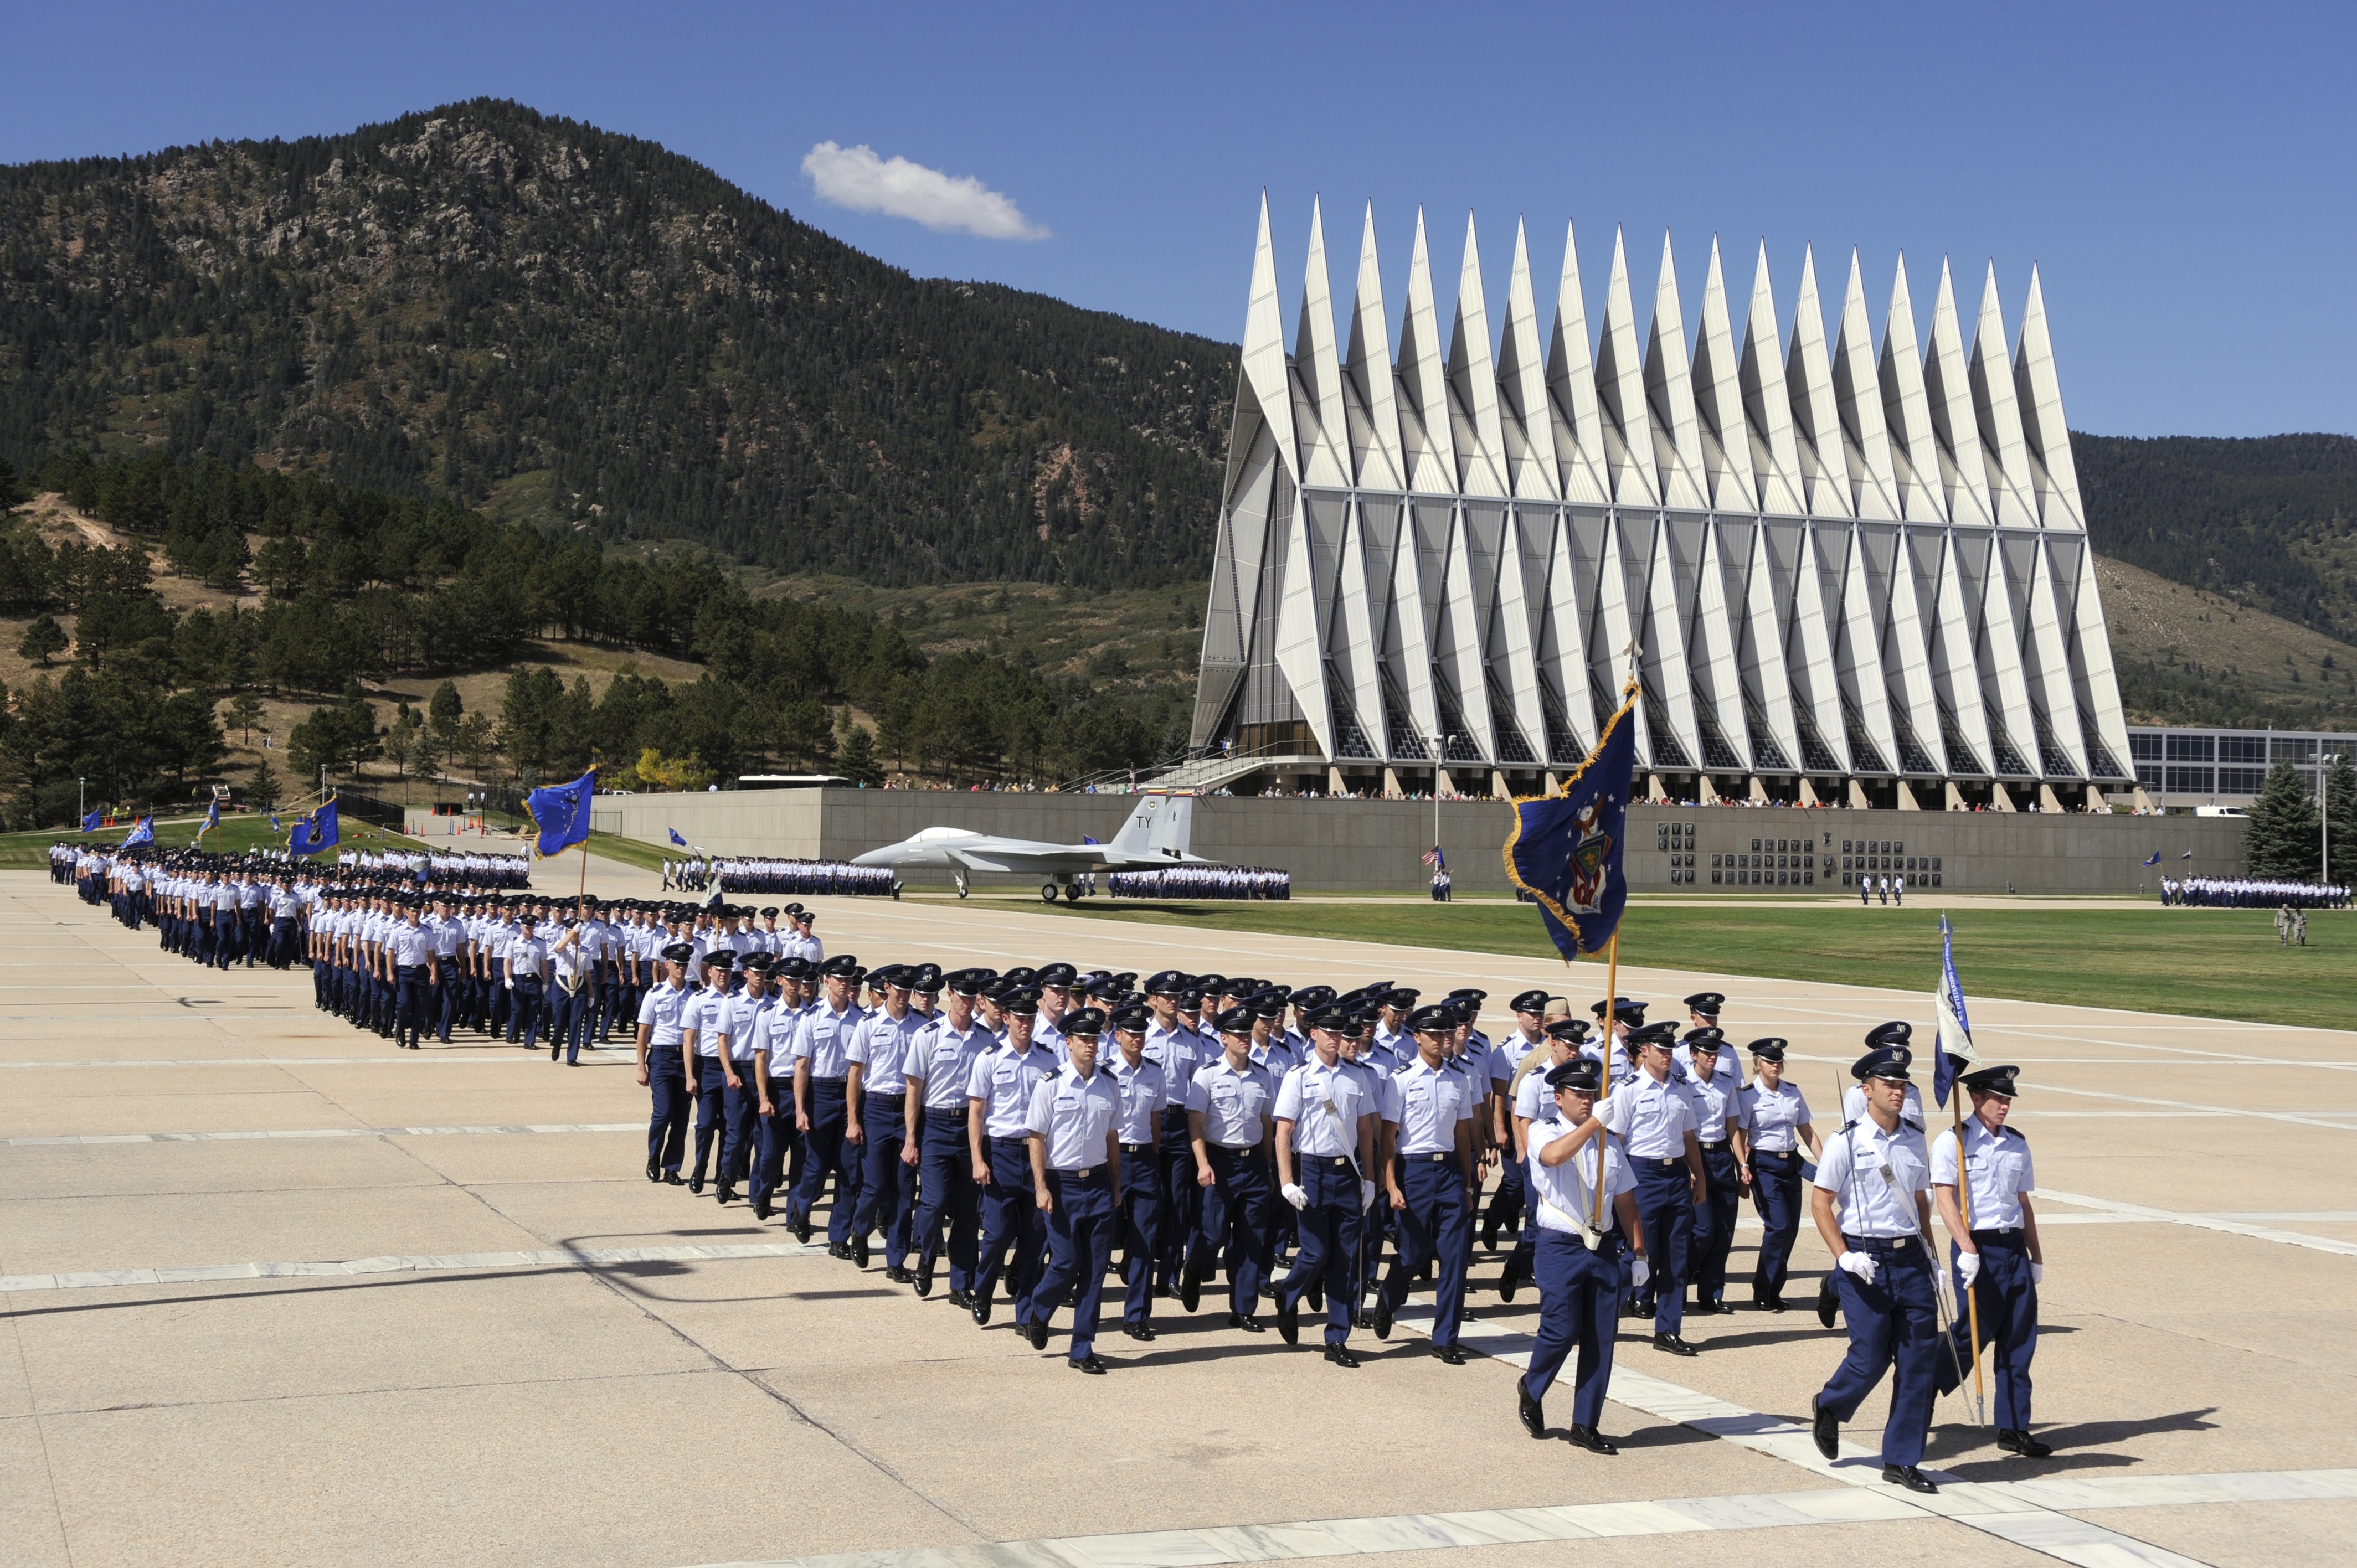 Athletics are 'effective' at Air Force Academy, Inspector General ...